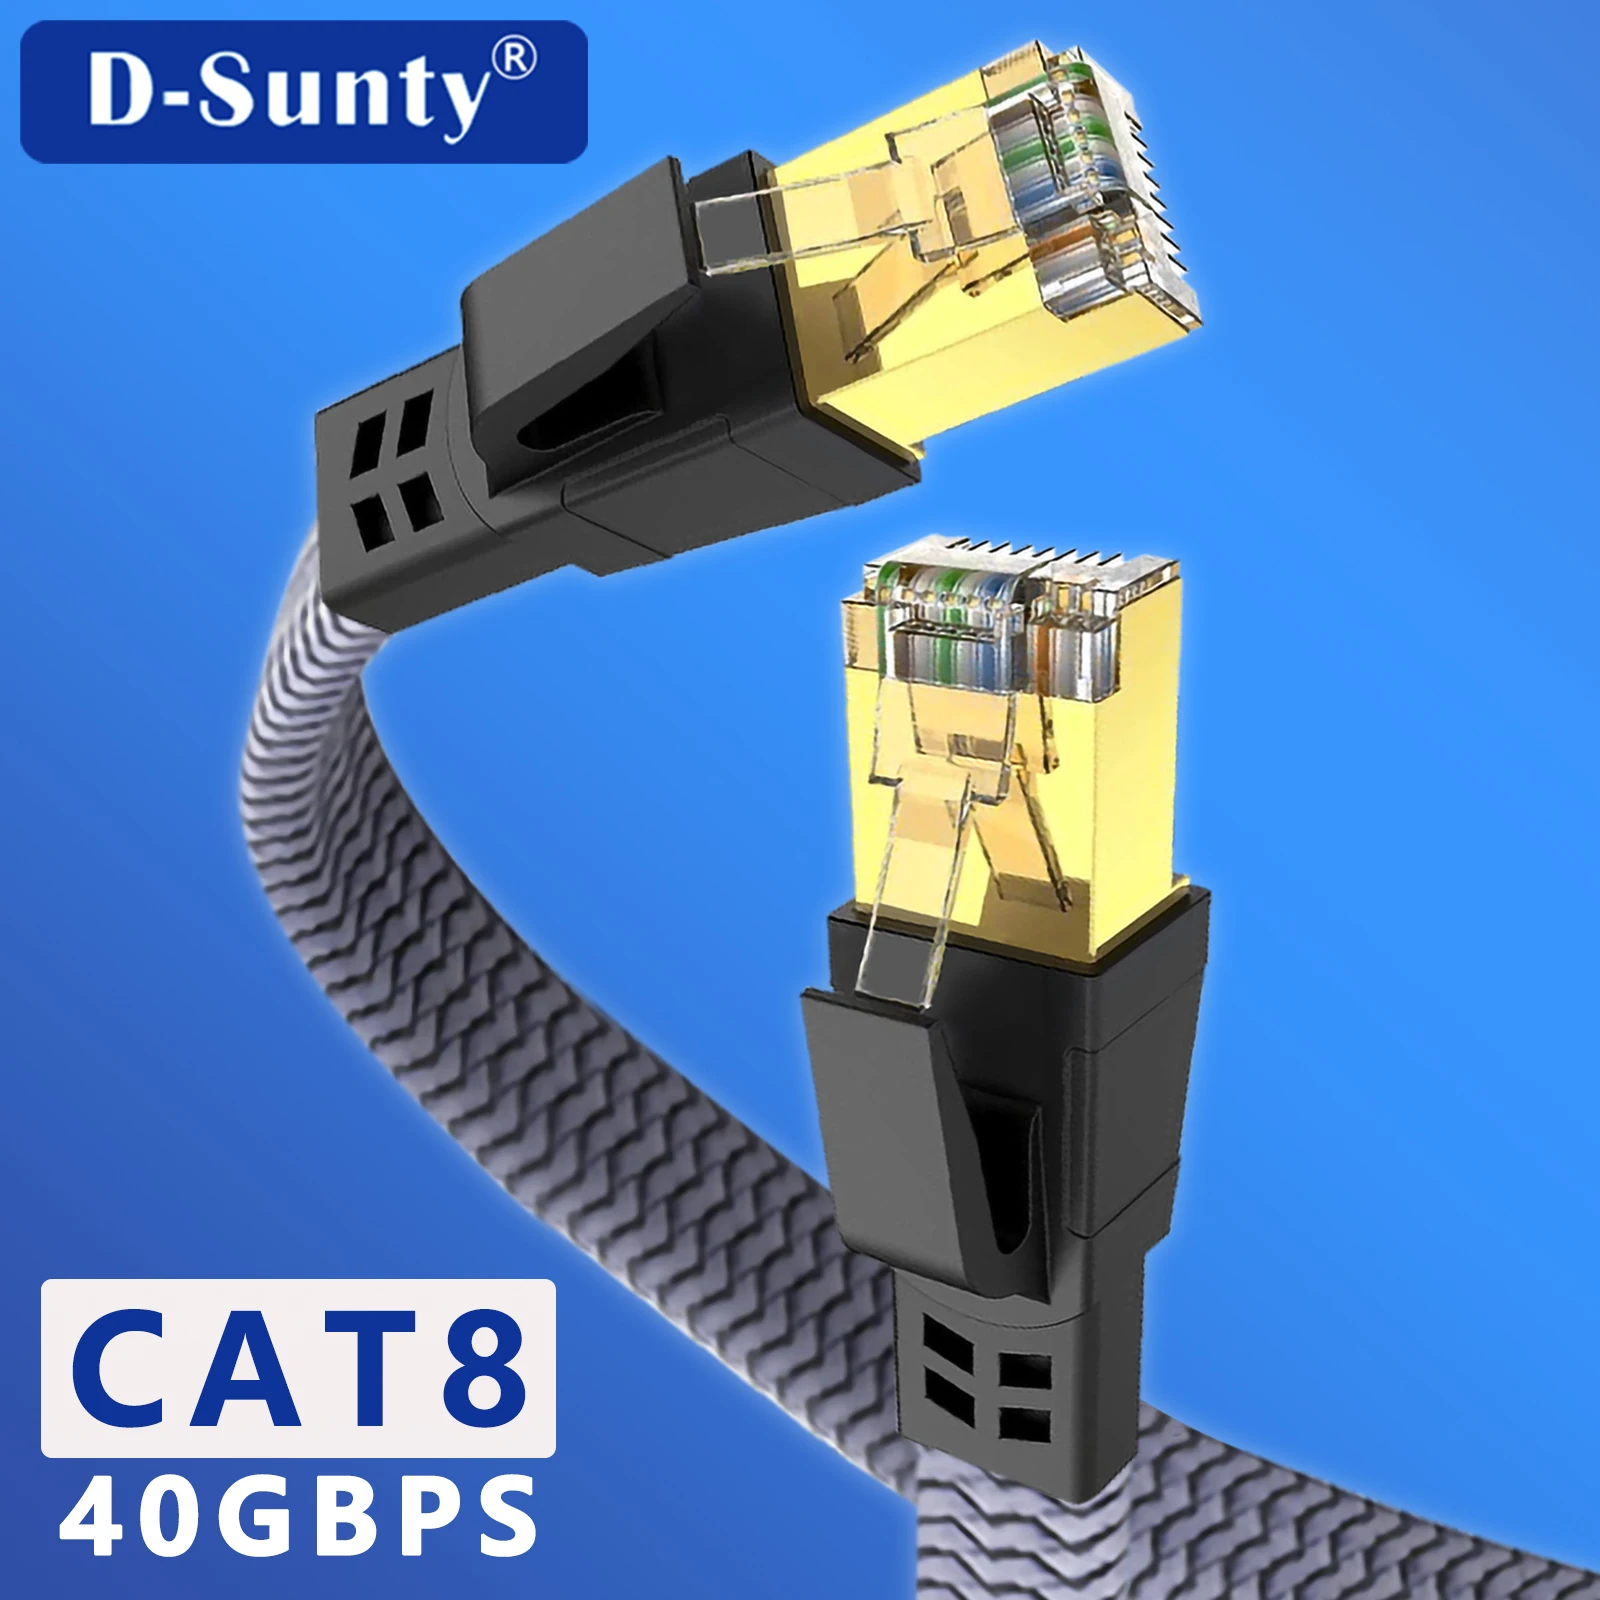 

CAT8 Ethernet Cable 40Gbps 2000MHz CAT 8 Flat Braided Network Internet Lan Cord for Laptops PS 4 Router RJ45 Cat 8 Cable